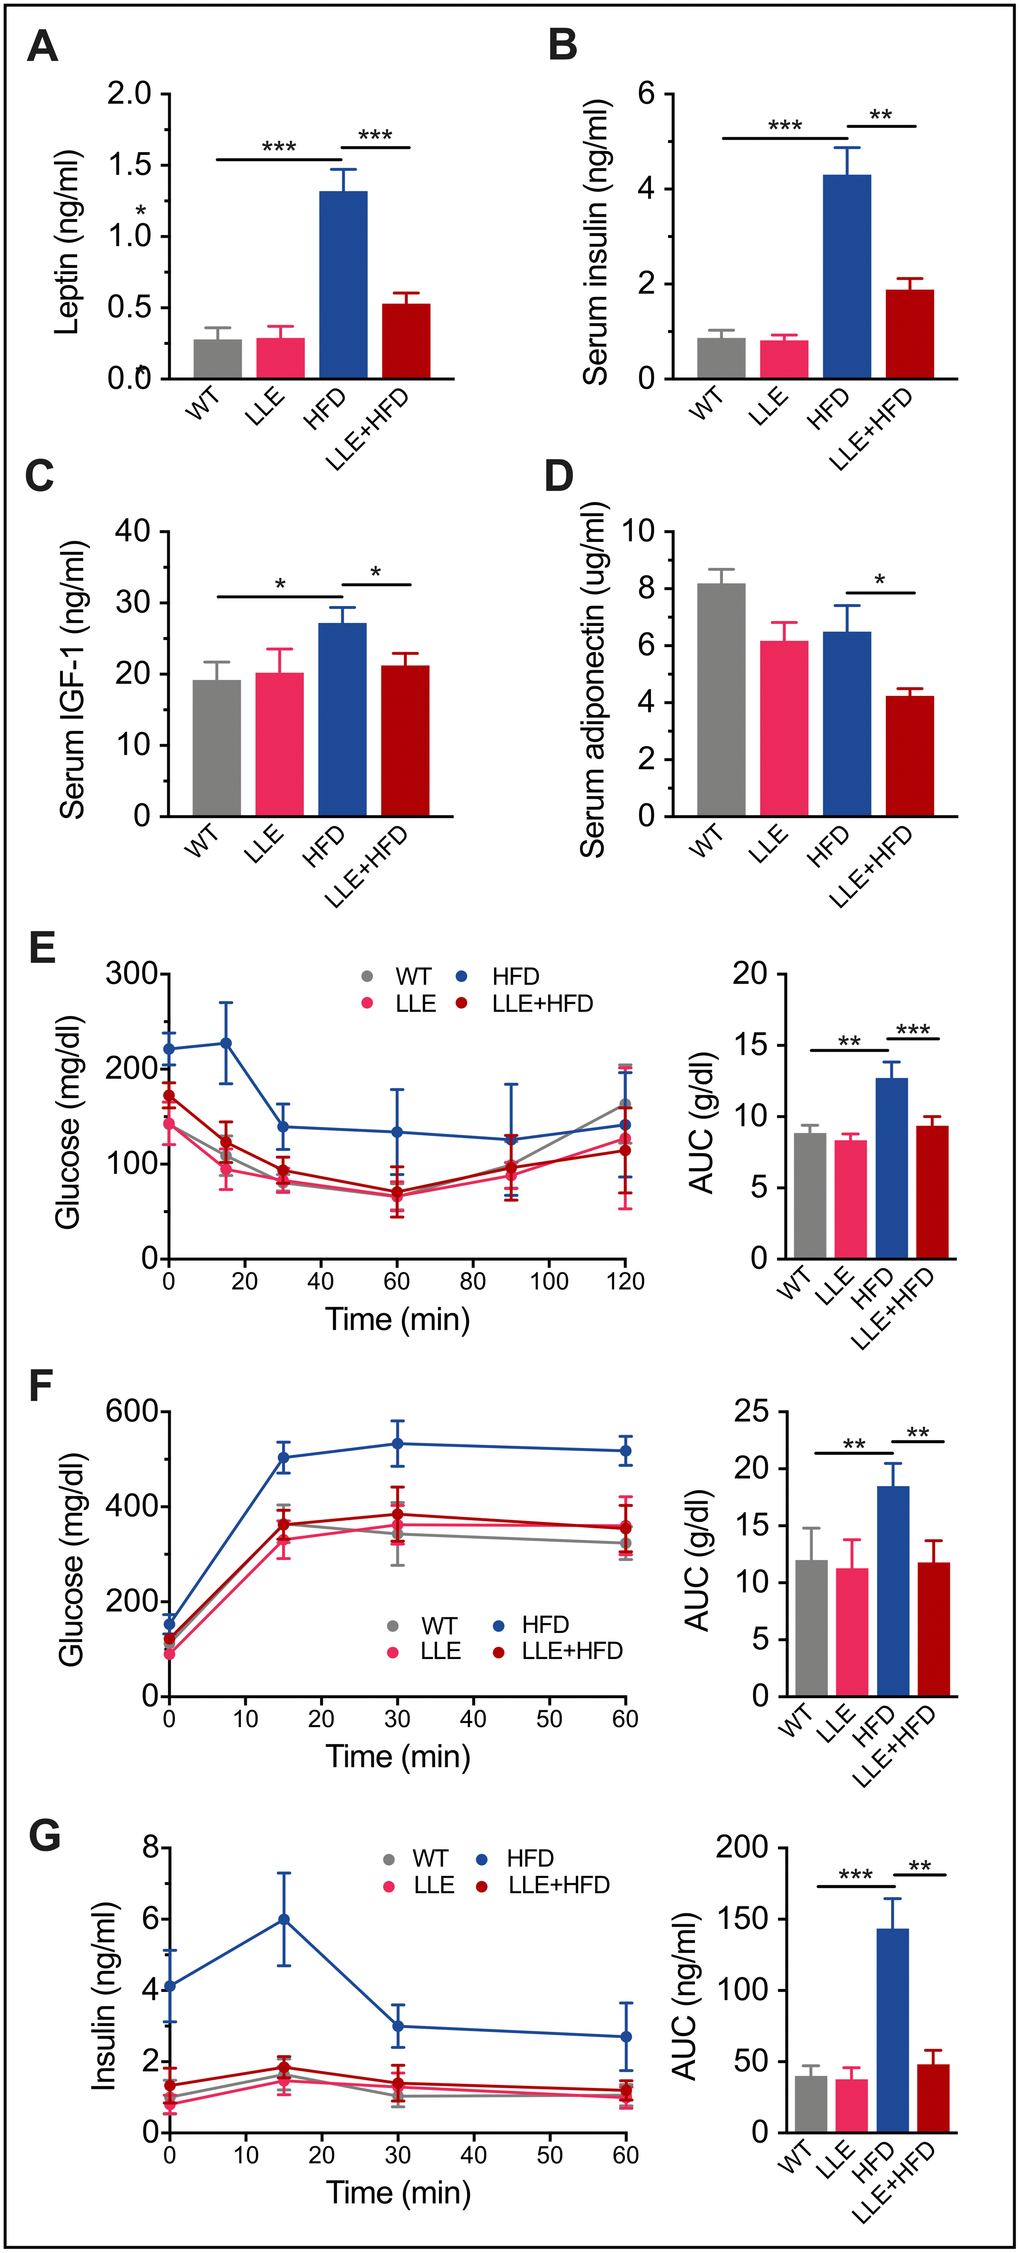 Low-dose ethanol intake increased insulin sensitivity of HFD mice. (A–D) Serum Leptin level, insulin level, IGF-1 level, and adiponectin level of four treatment regimens at week 44. (n=9 per group). (E) Plasma levels of glucose after intraperitoneal insulin injection (ITT) and area under curve (AUC) (n=9 per group). (F–G) Plasma levels of glucose and insulin measured after oral glucose tolerance test (OGTT) (n=7-10 per group). The tests were performed with 44-week-old mice under 12-weeks HFD/normal diet treatment. For oral glucose tolerance test (OGTT), mice were fasted overnight and gavaged with 2 g/kg of glucose. Insulin tolerance tests (ITT) were performed in nonfasted mice by IP injection of 1.5 IU/kg of insulin. Data are presented as mean ± SEM. *, PPP